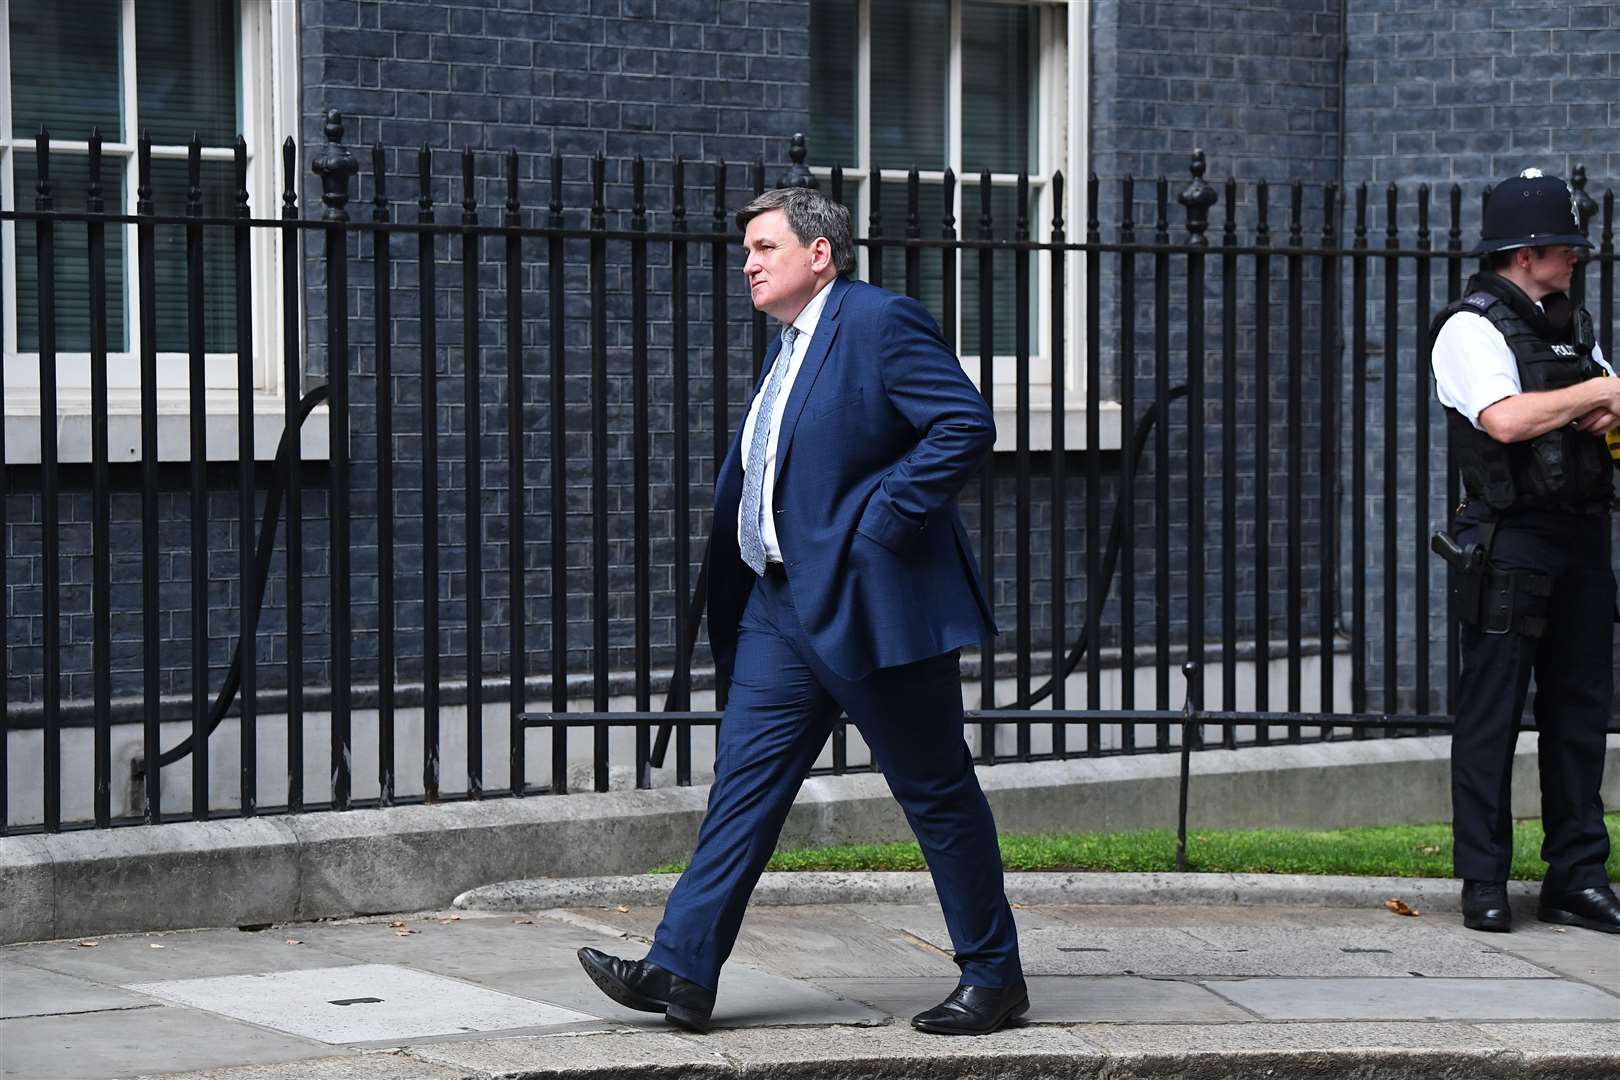 Home Office minister Kit Malthouse in Downing Street (Victoria Jones/PA)